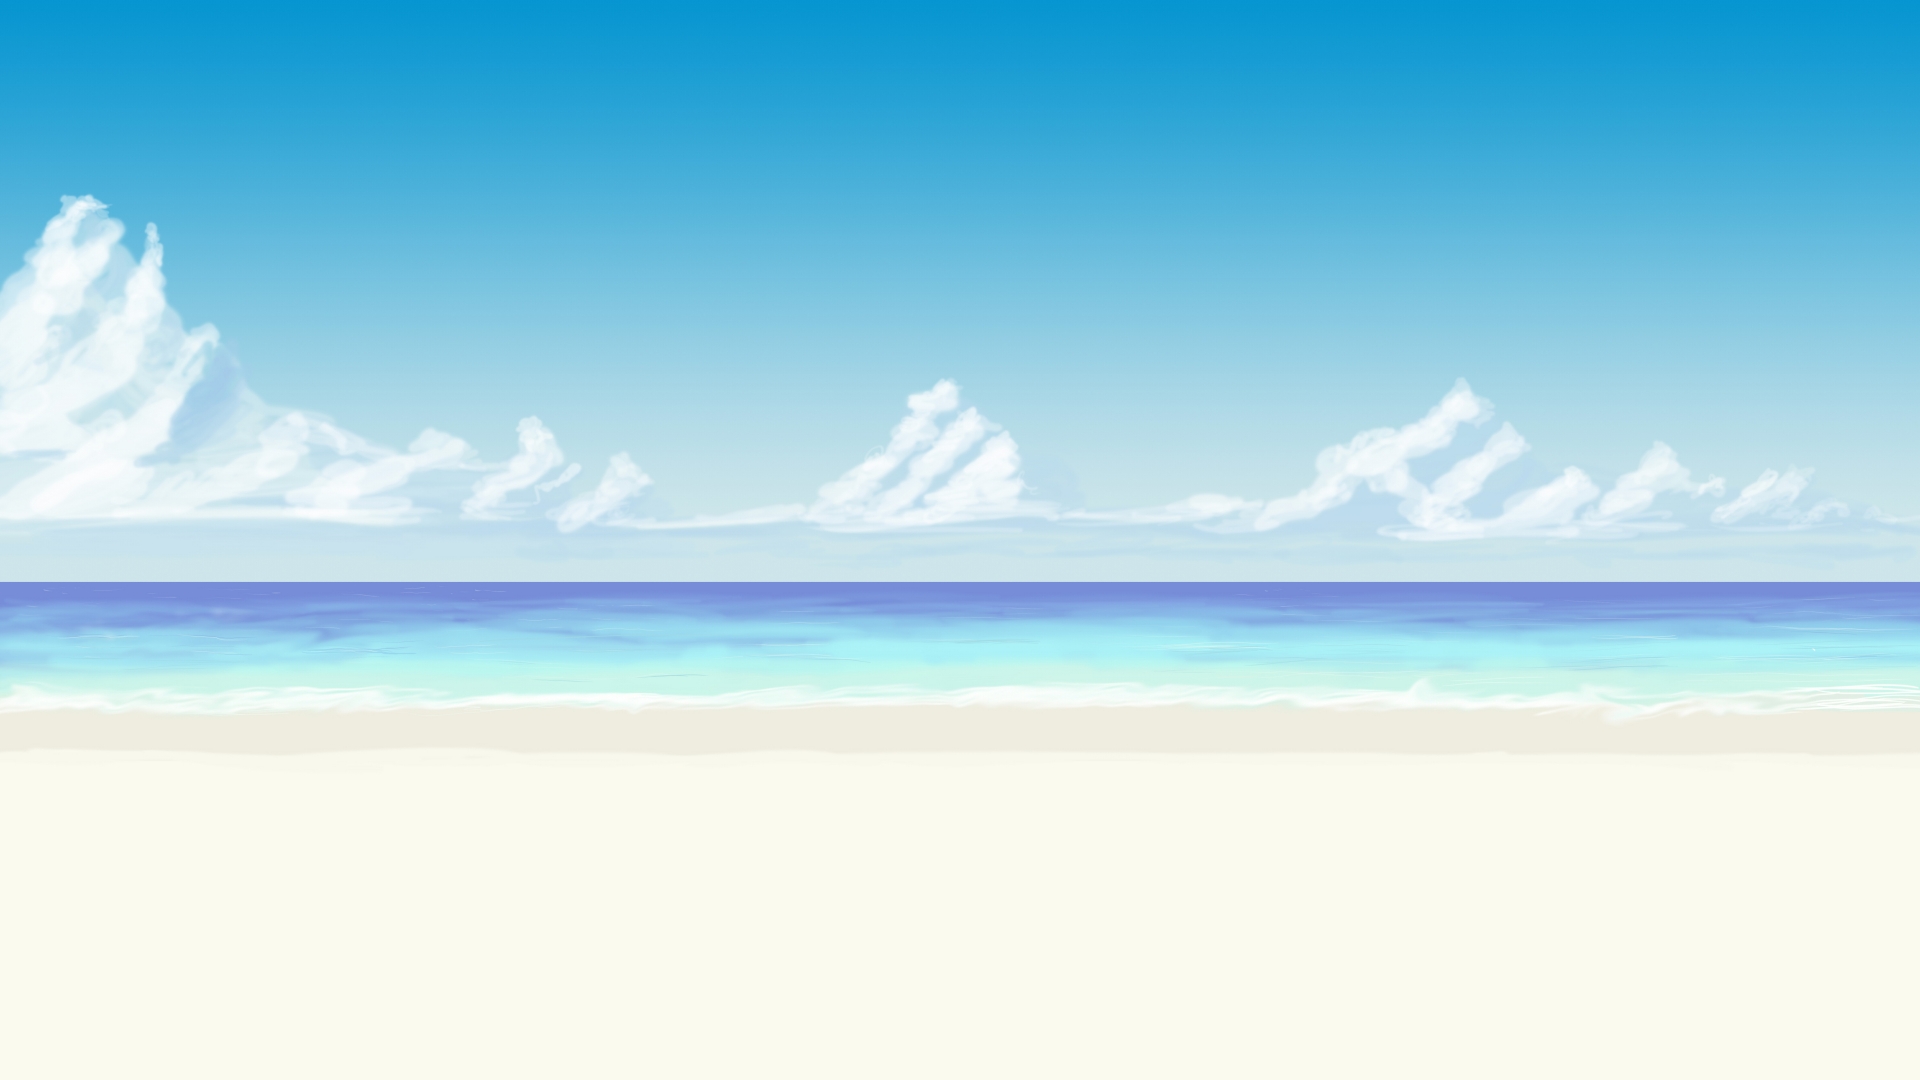 Another Anime Beach Background By Wbd